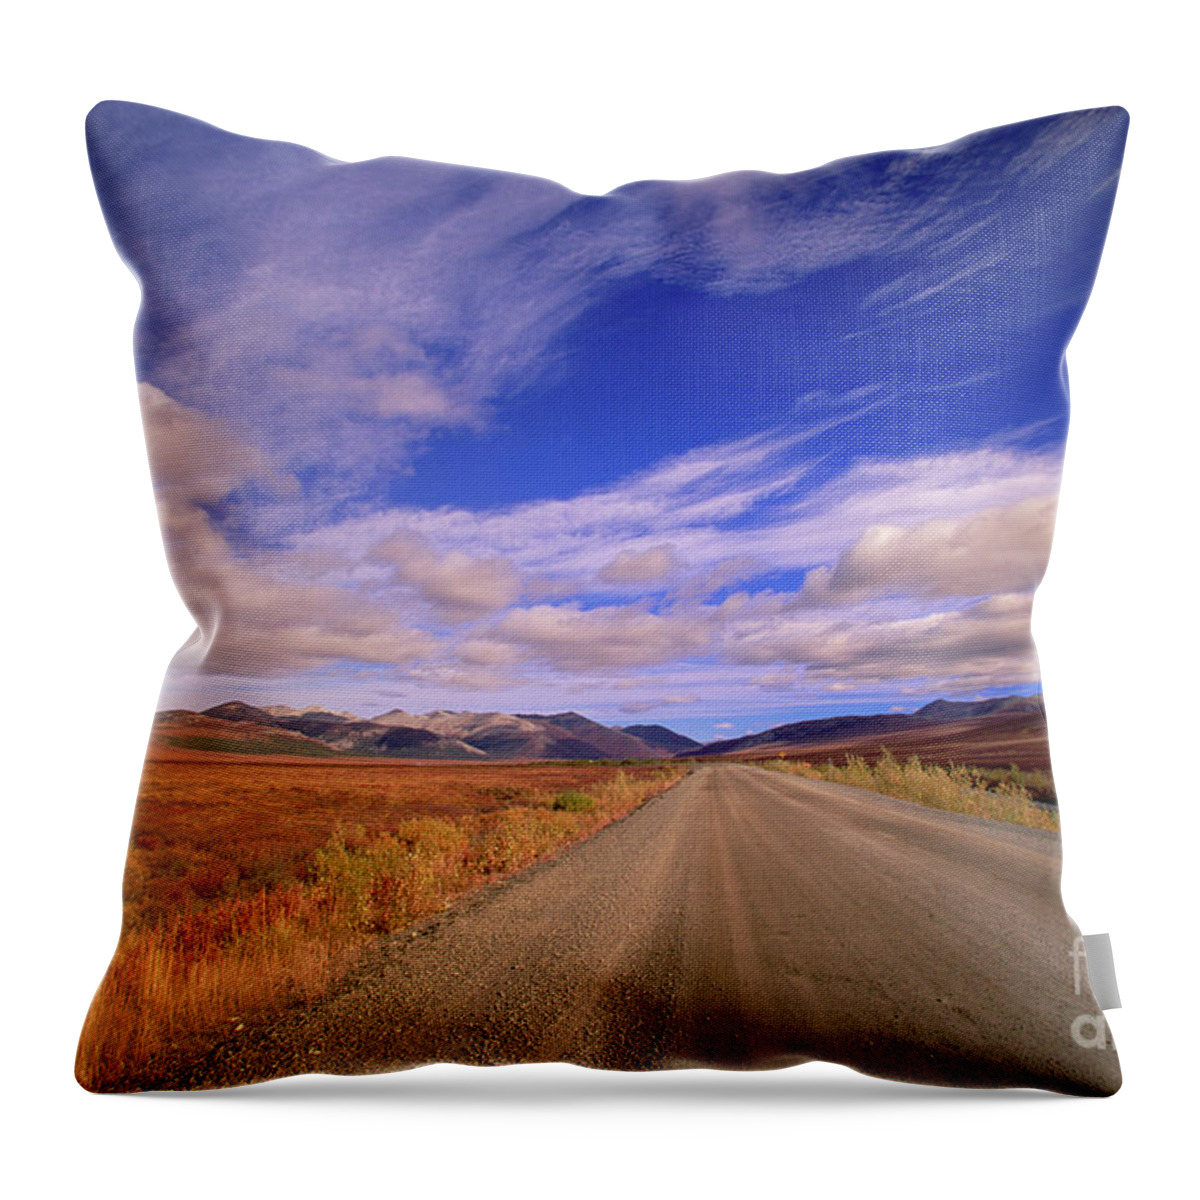 00341510 Throw Pillow featuring the photograph Clouds Over Fall Tundra by Yva Momatiuk John Eastcott